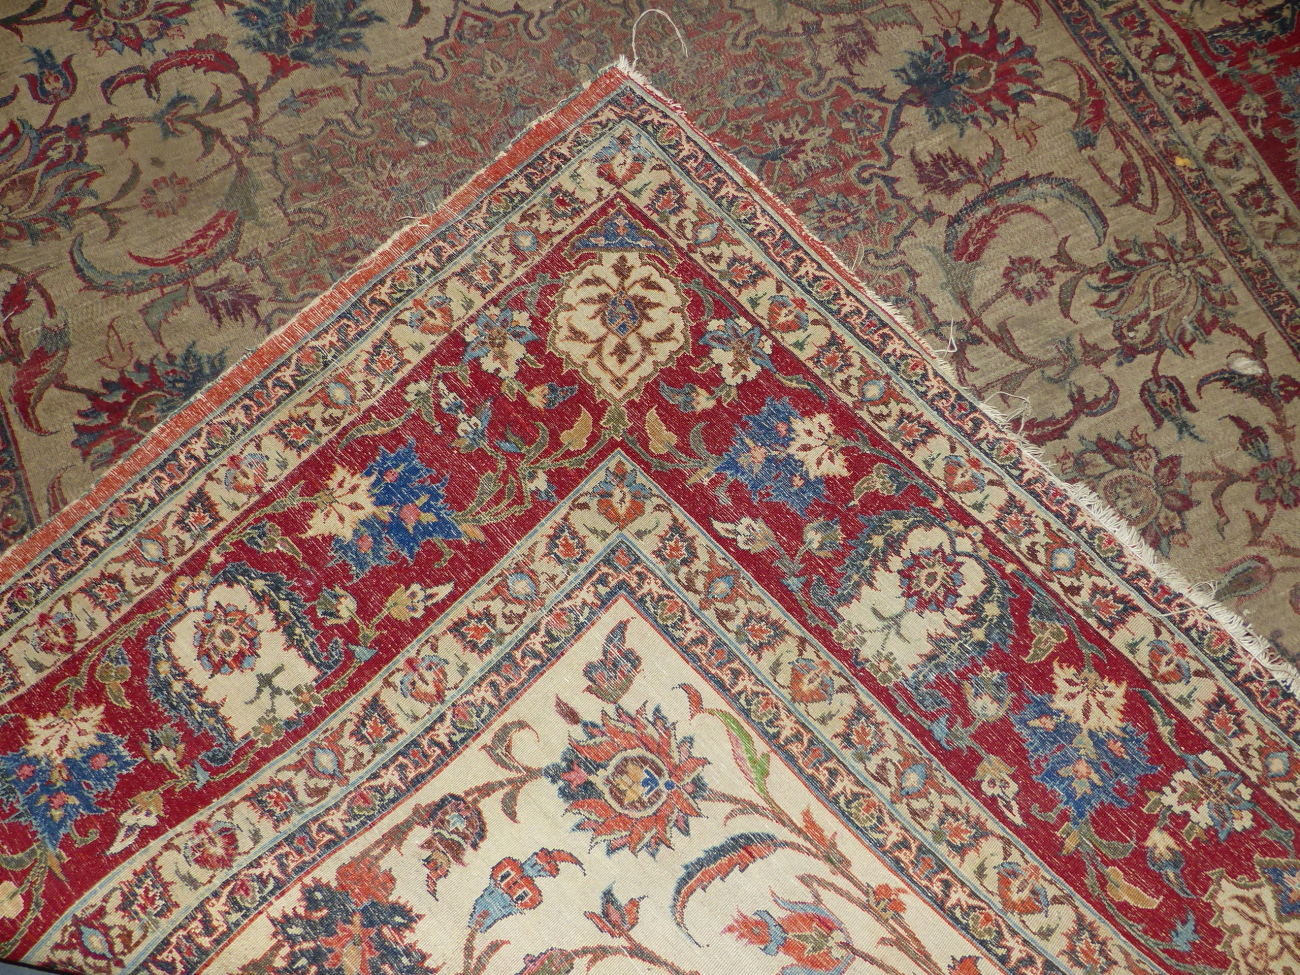 AN ANTIQUE PERSIAN ISFAHAN RUG. 207 x 145cms. - Image 7 of 7